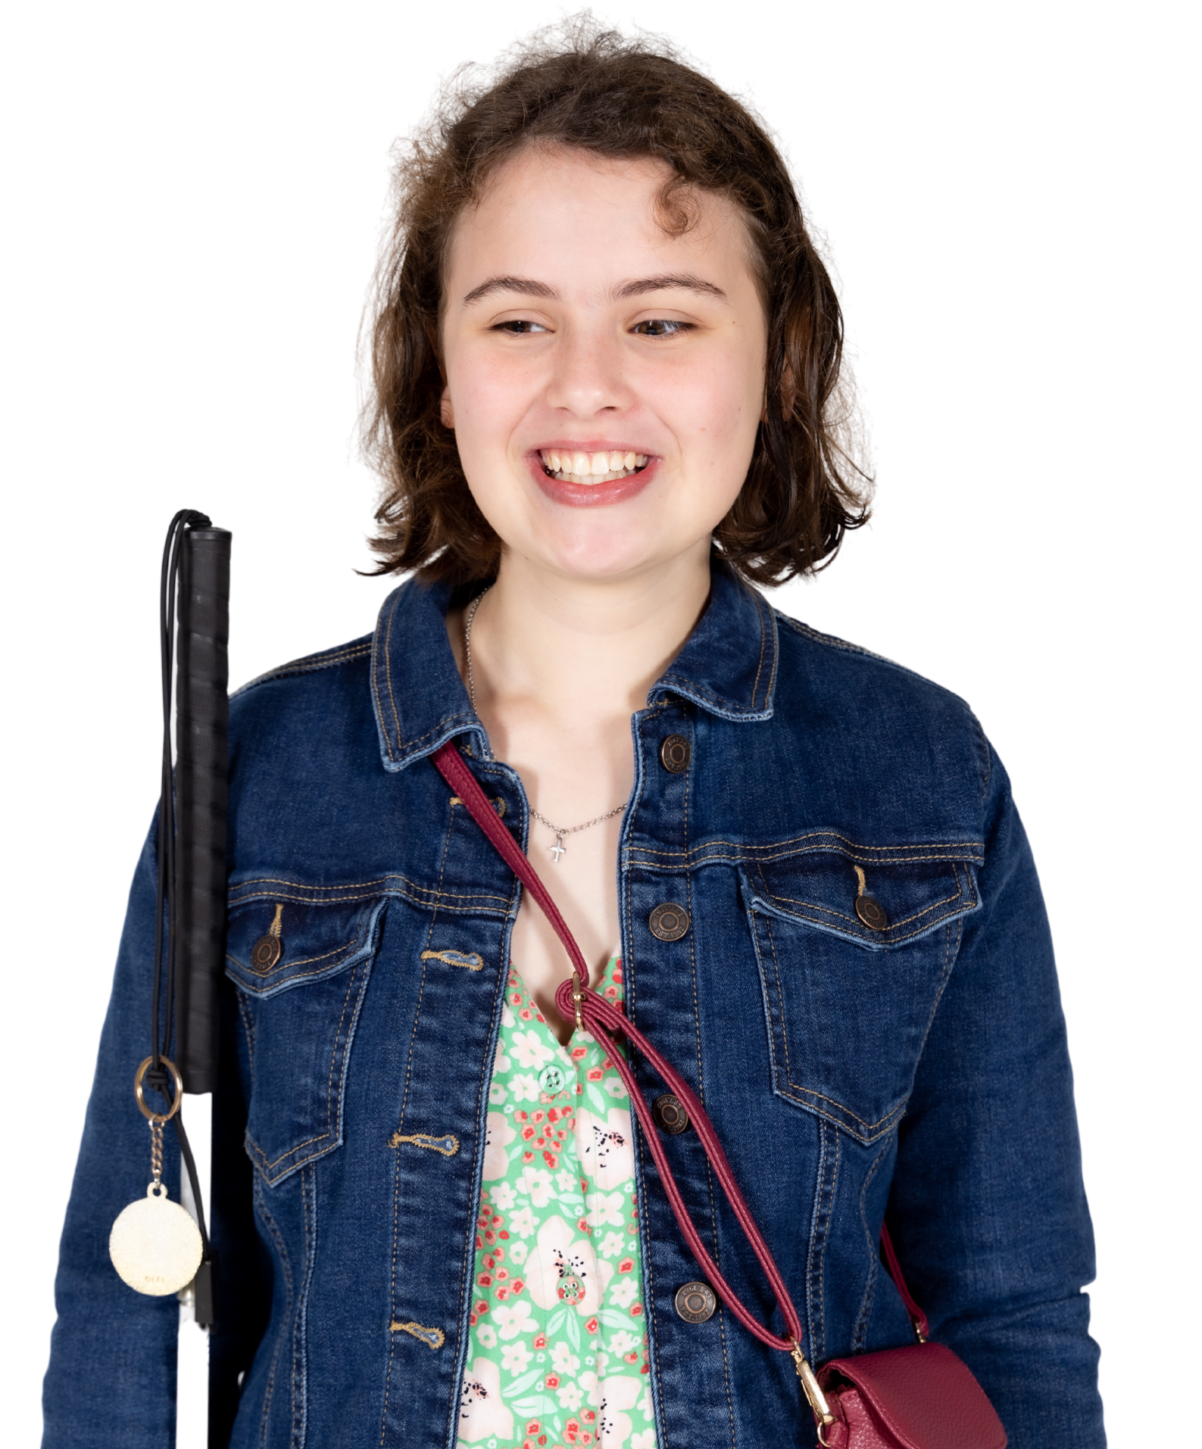 Client Isabelle is holding her white cane and smiling confidently at the camera